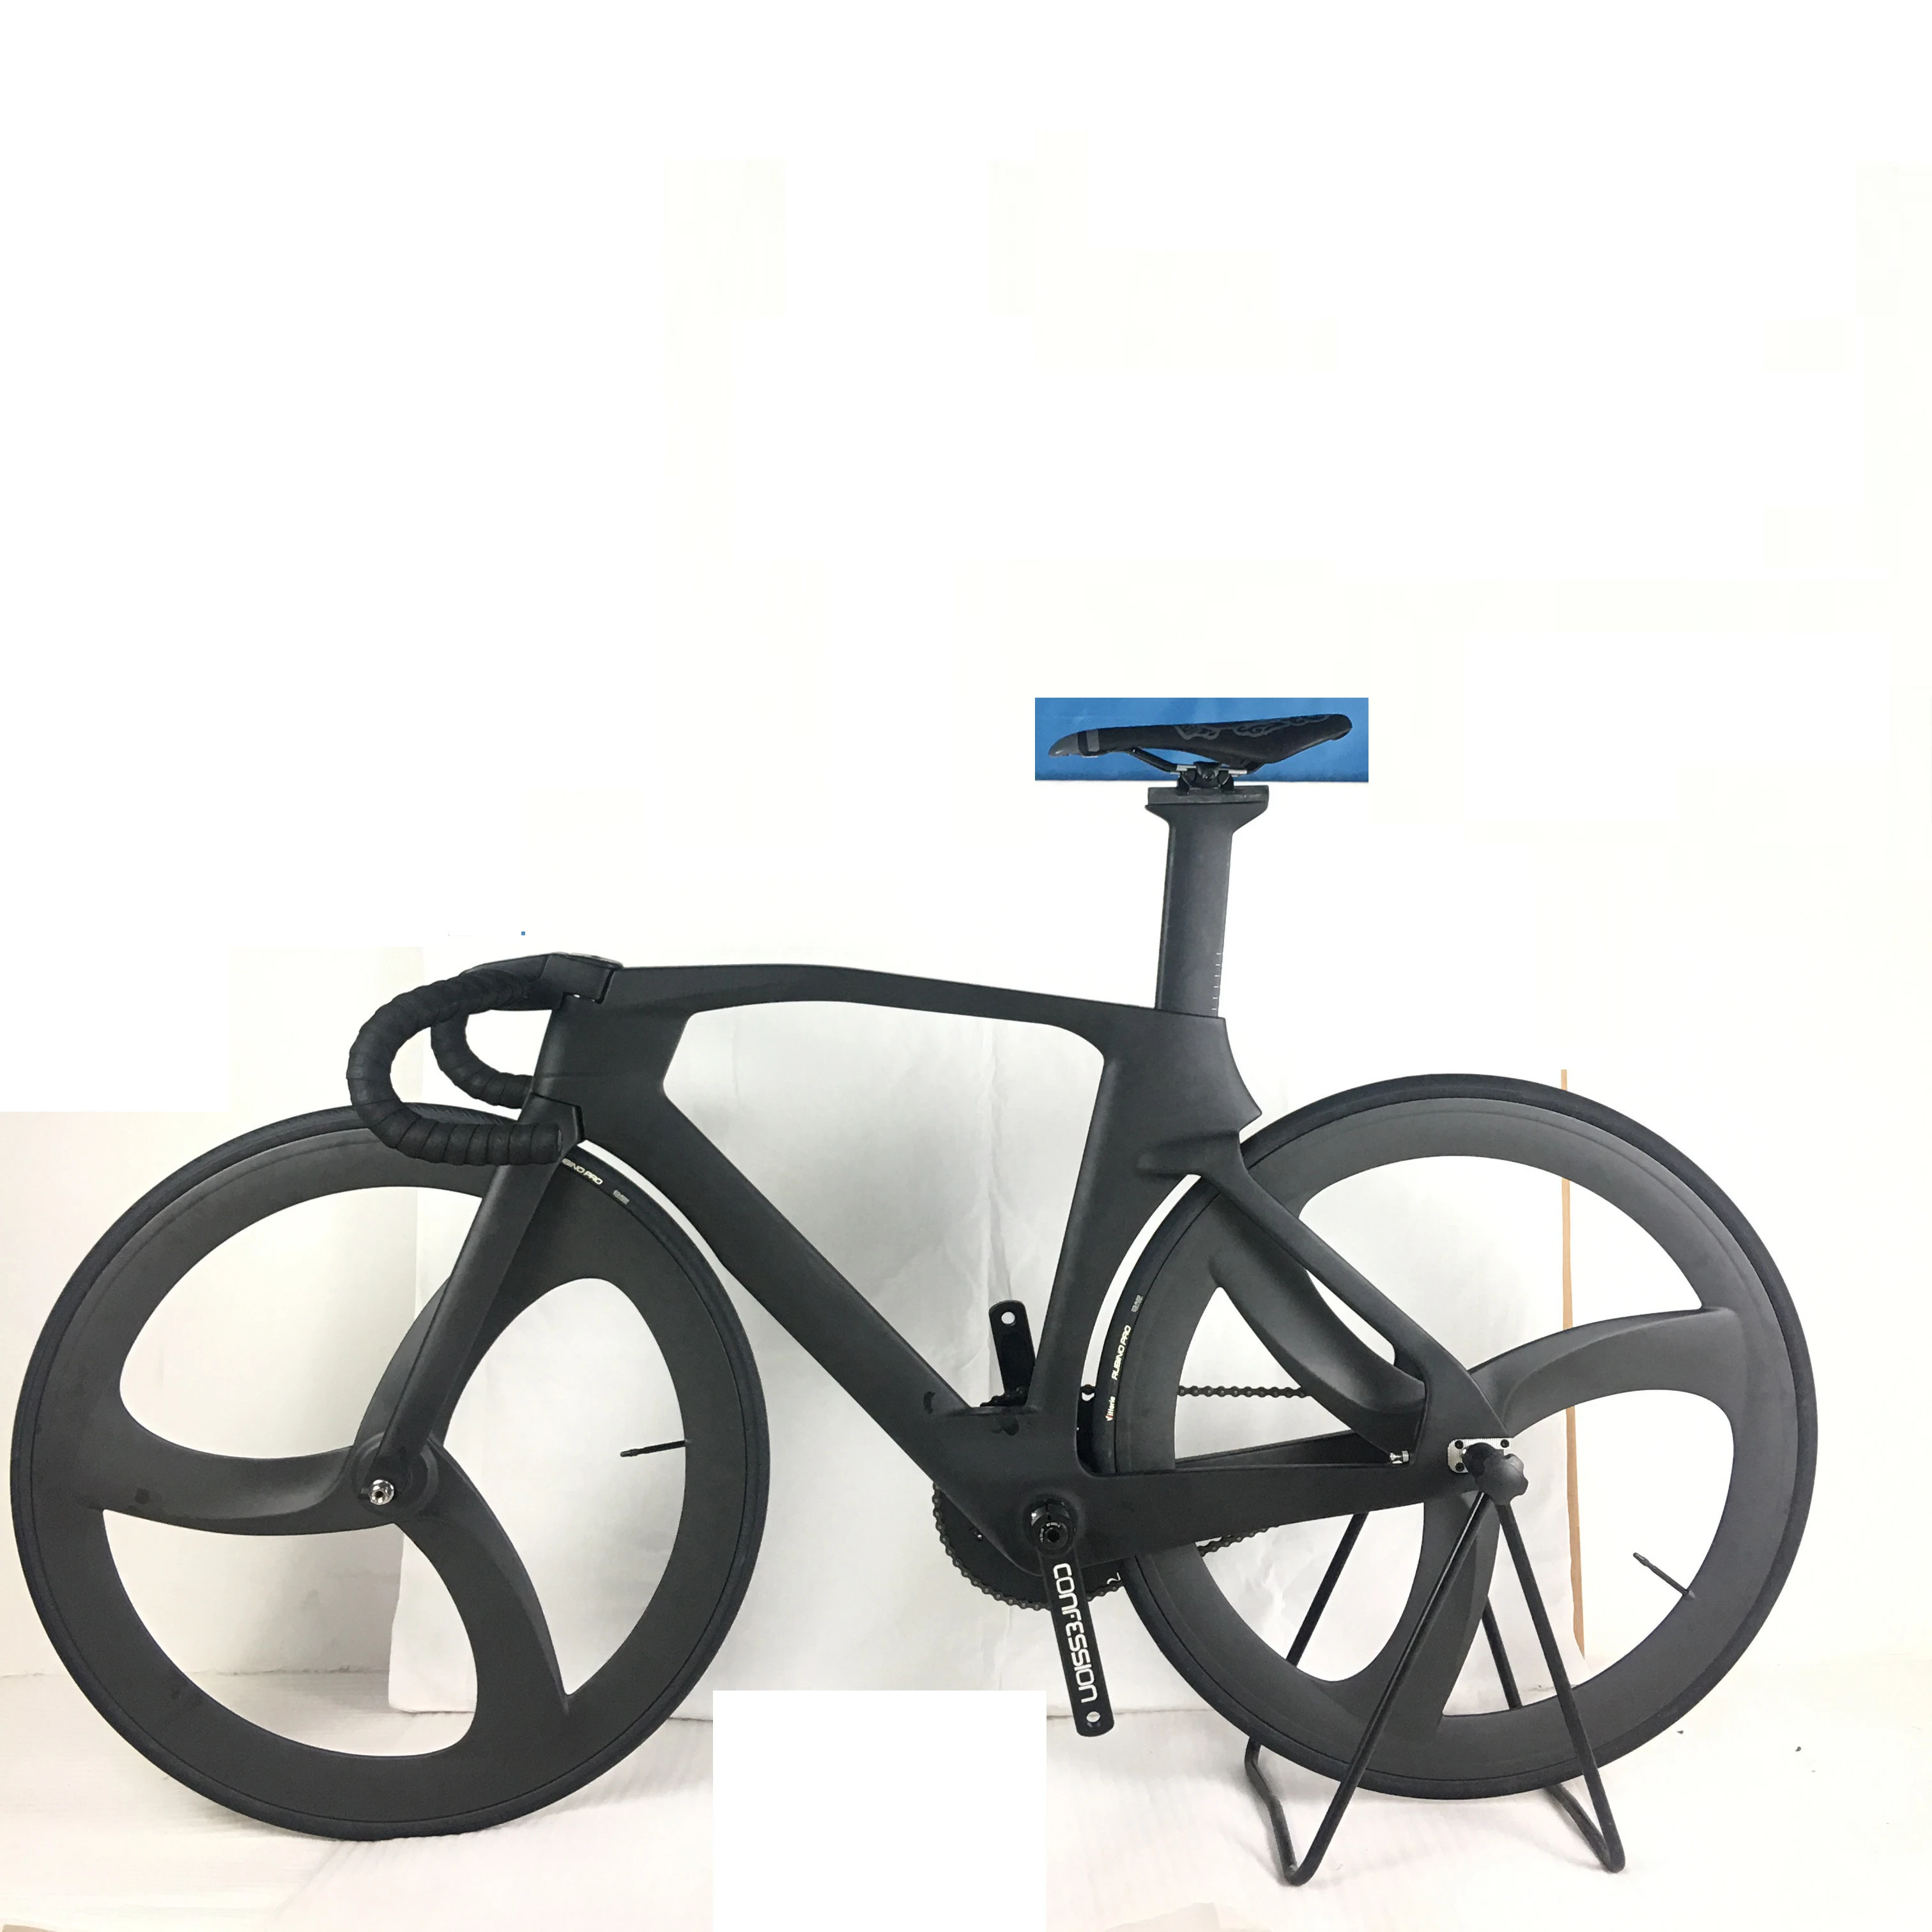 700c New Carbon 8.6kg track/fixed gear Bike with tri spoke full carbon fiber UD matte clincher wheel with bike pedals